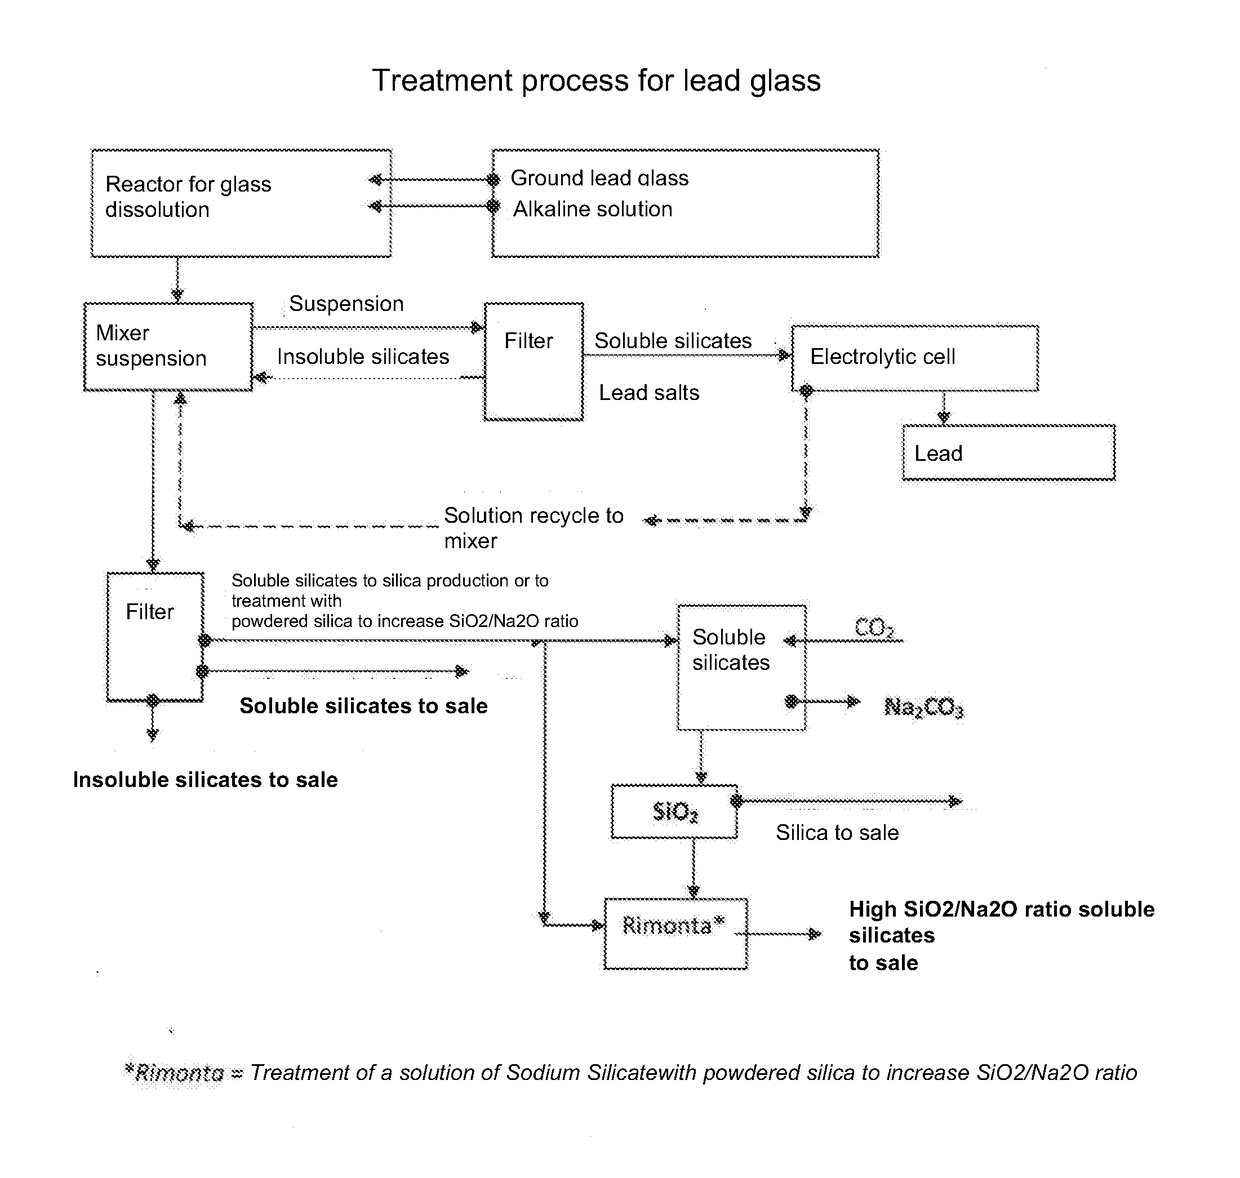 Hydrothermal process for the treatment of lead glass with recovery of lead metal, soluble and insoluble silicates and silica